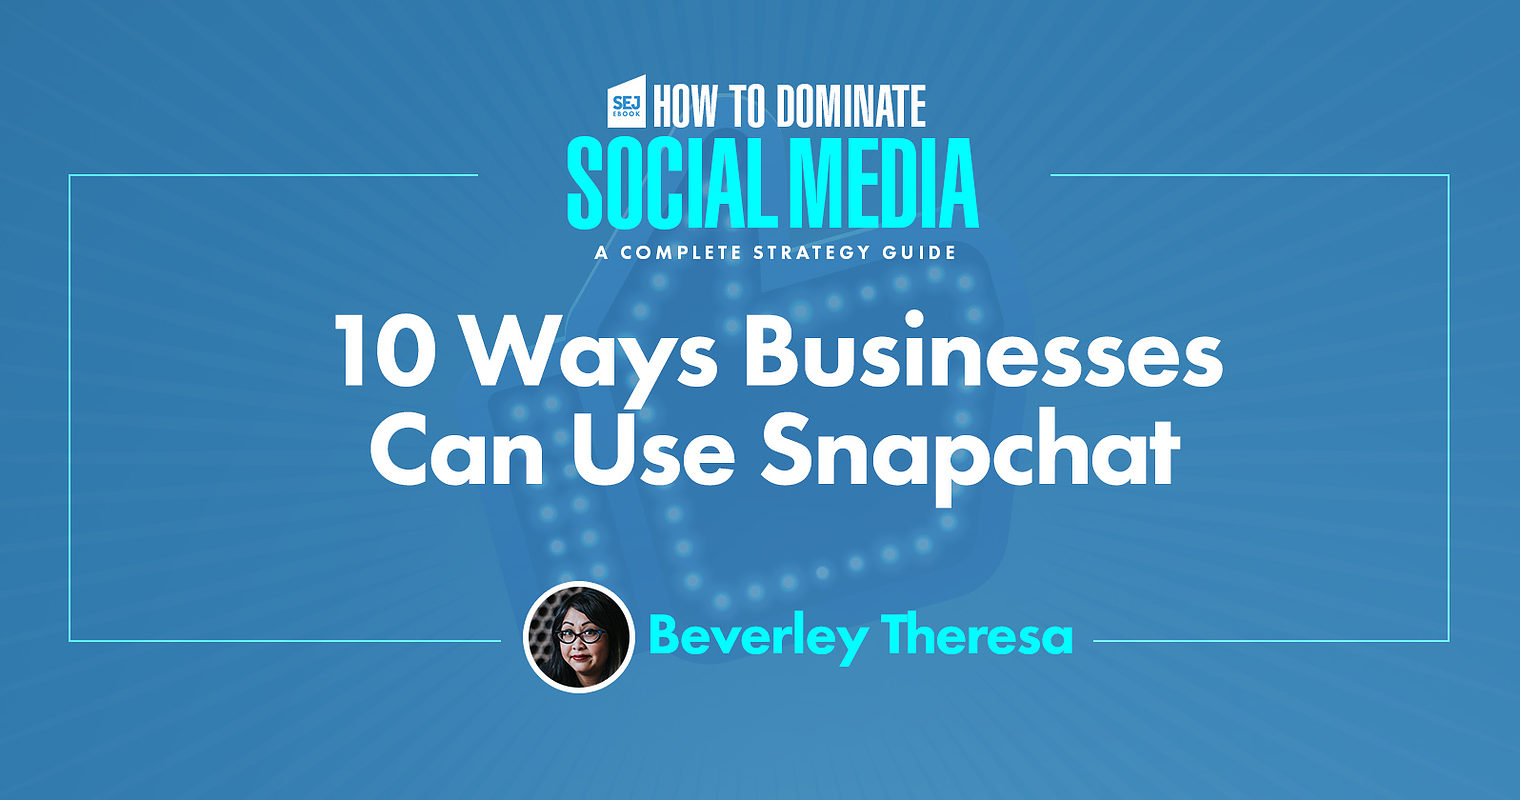 10 Ways Businesses Can Use Snapchat